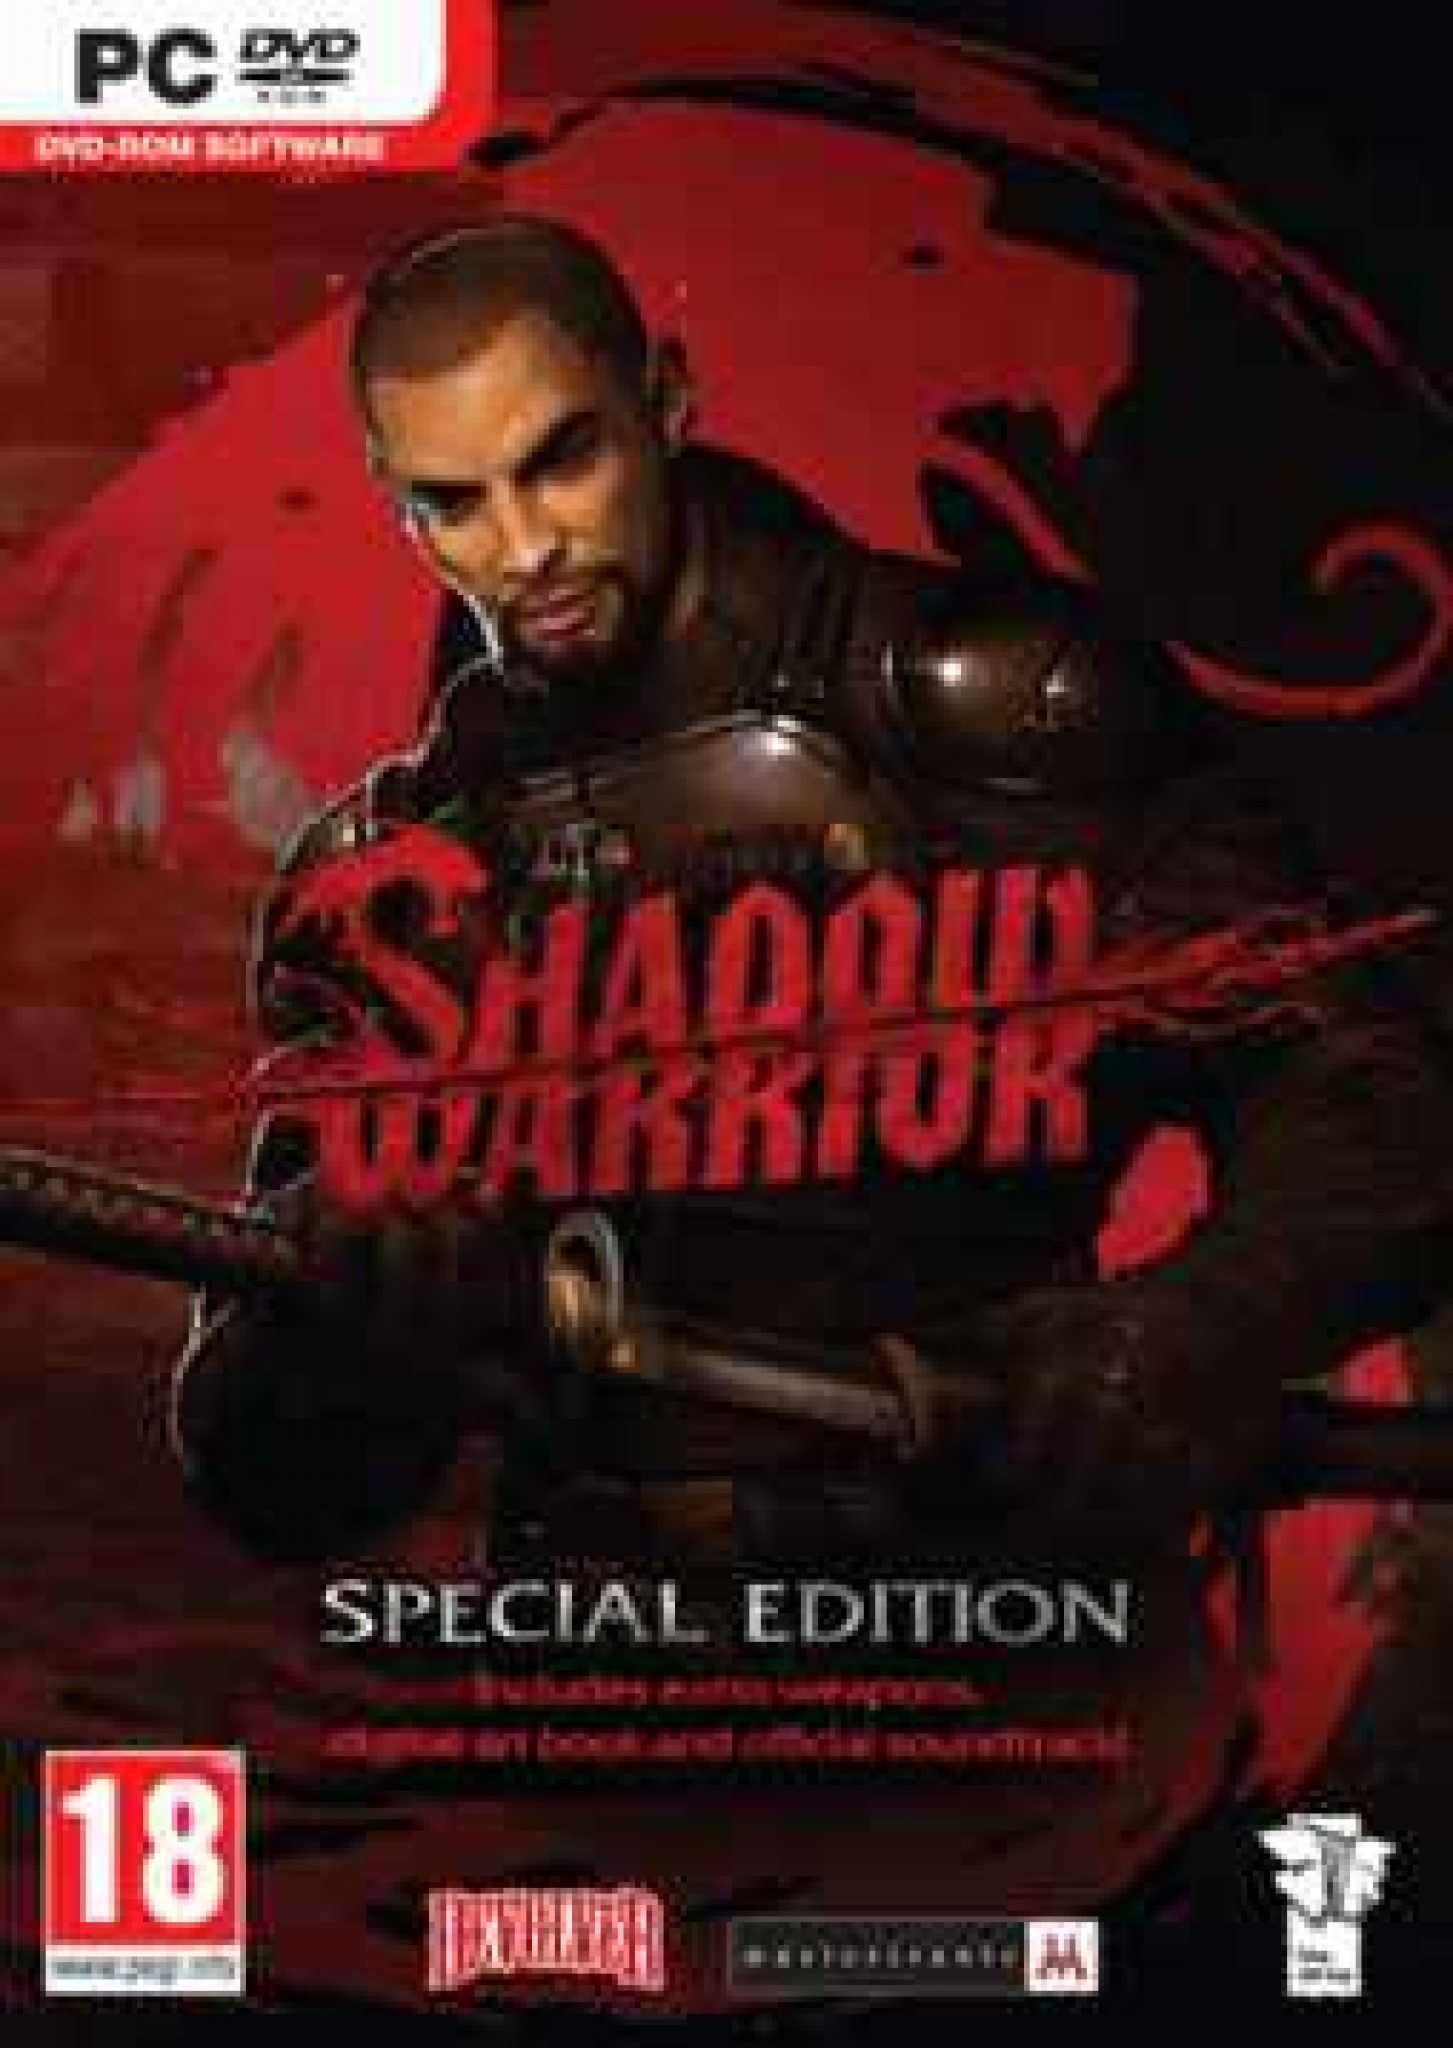 shadow warrior game download free